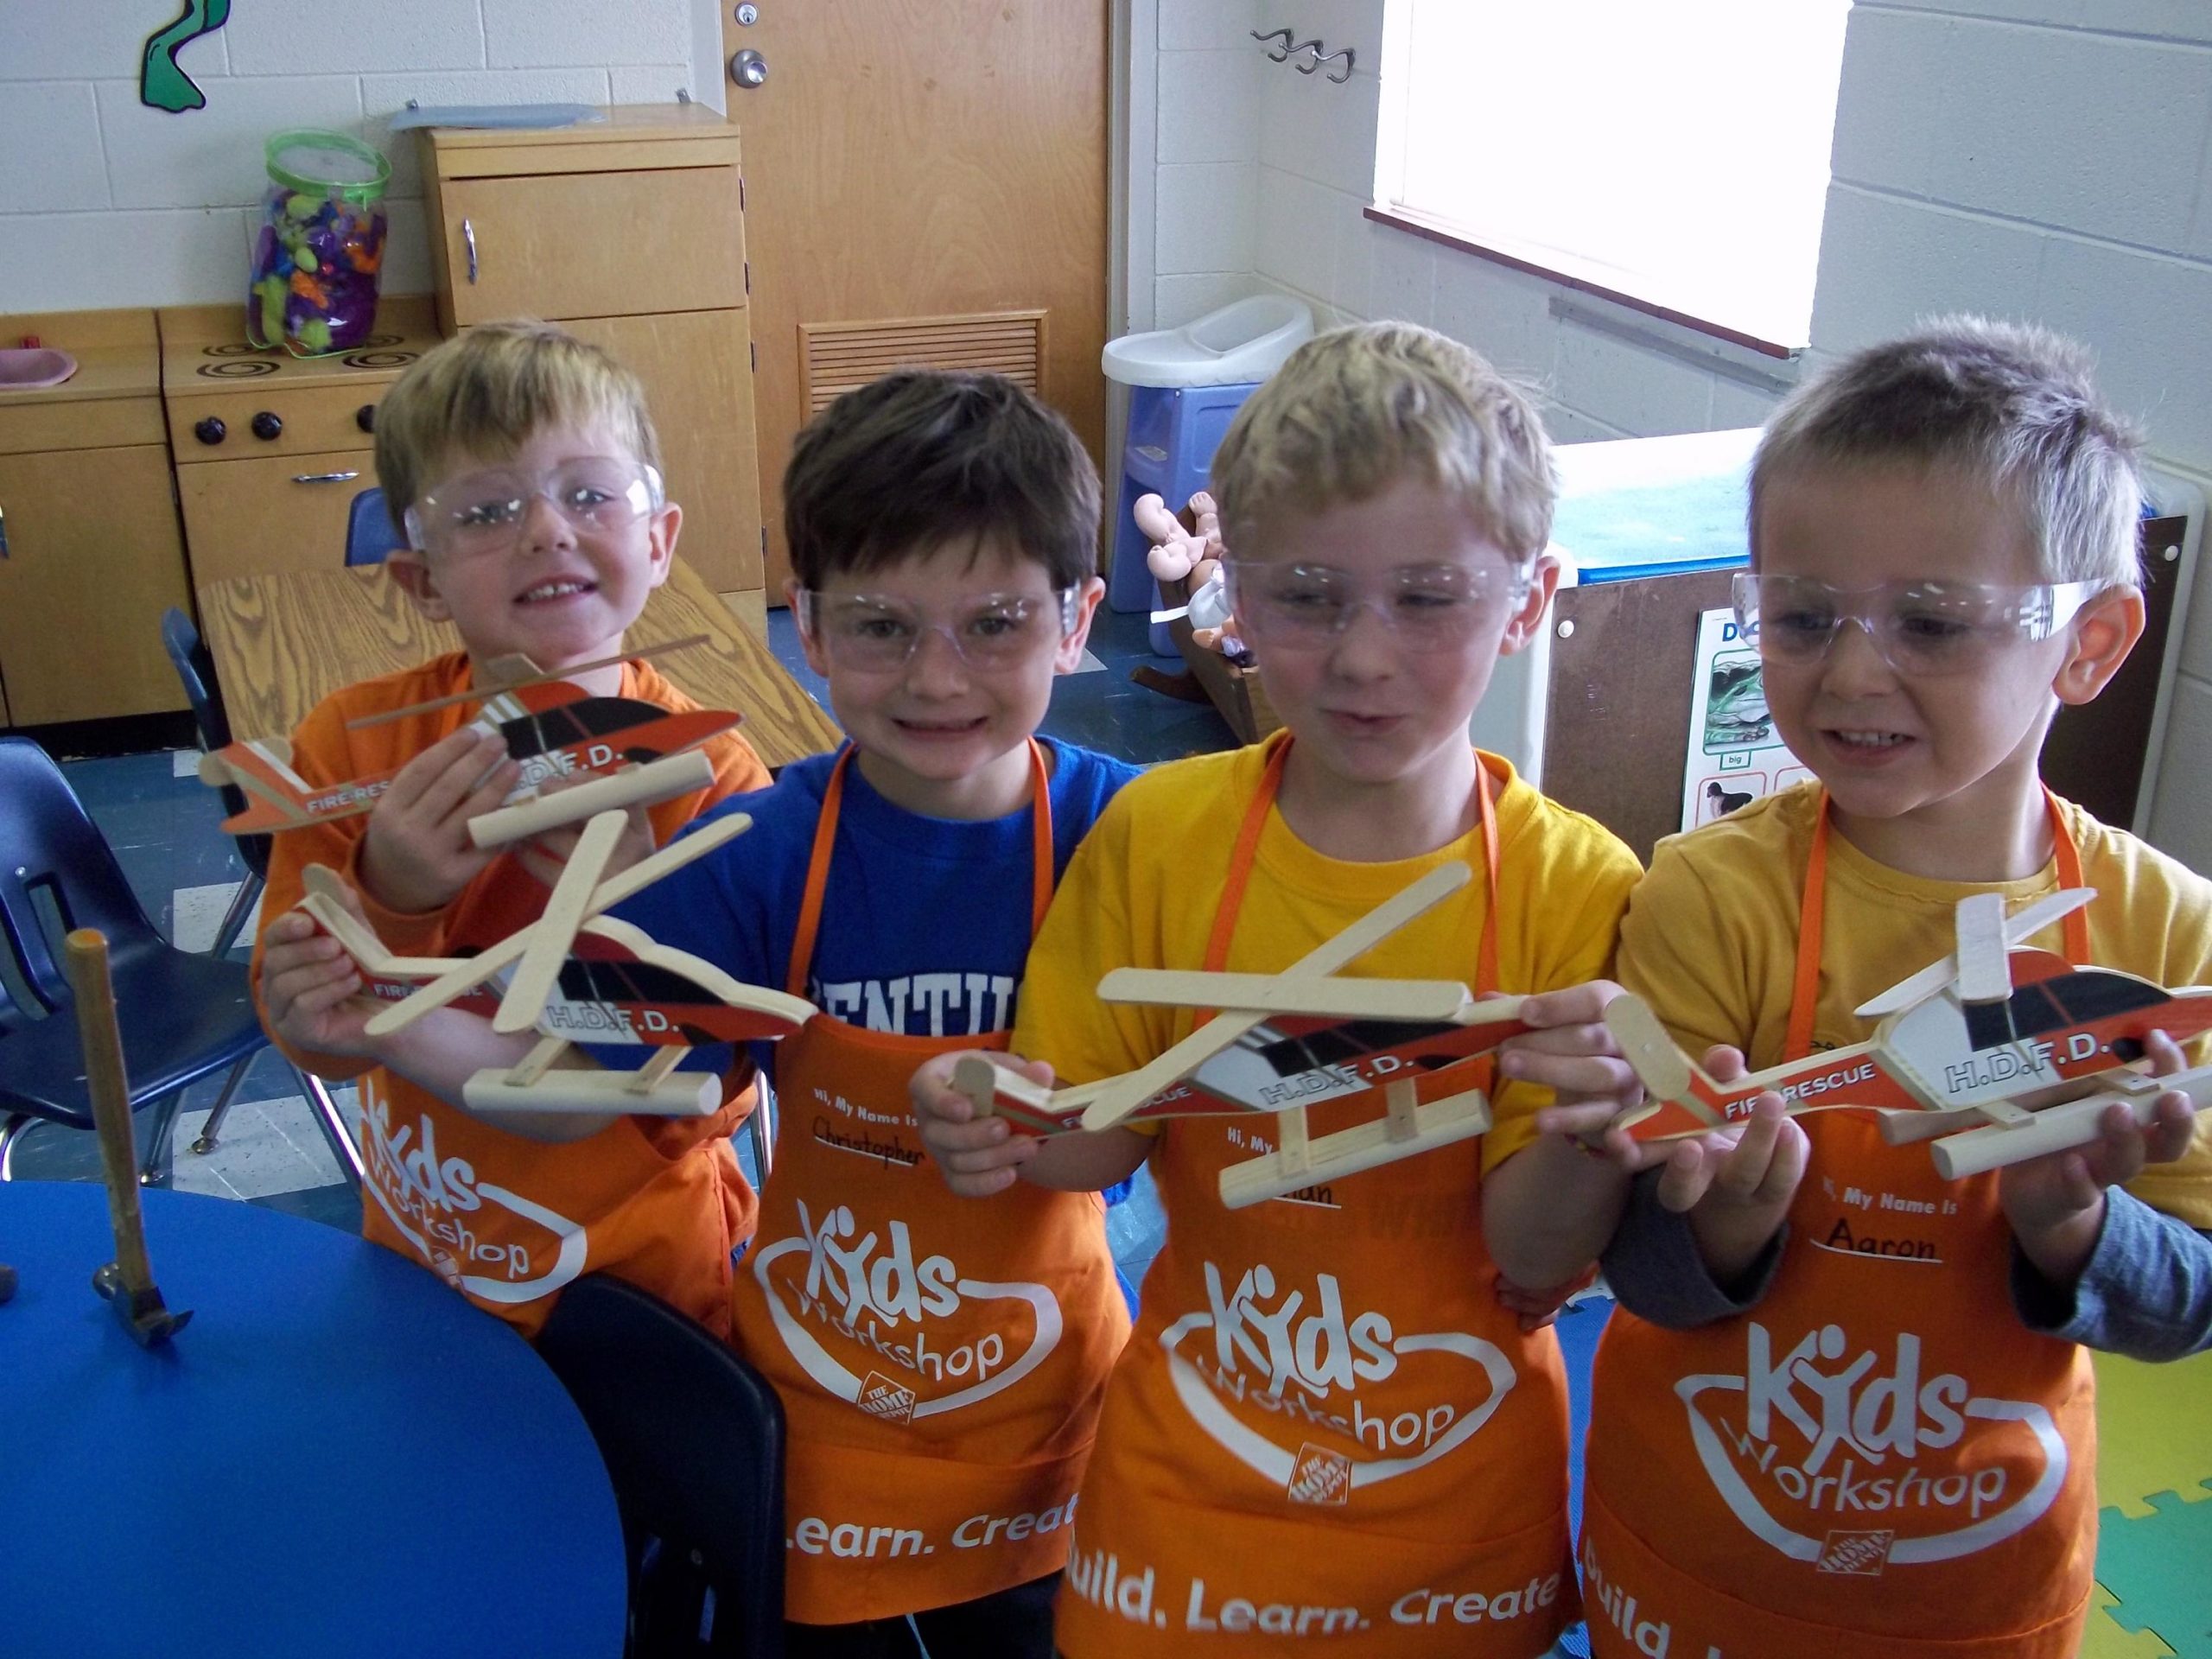 Jack, Christopher, Ethan, and Aaron Show off their helicopters.